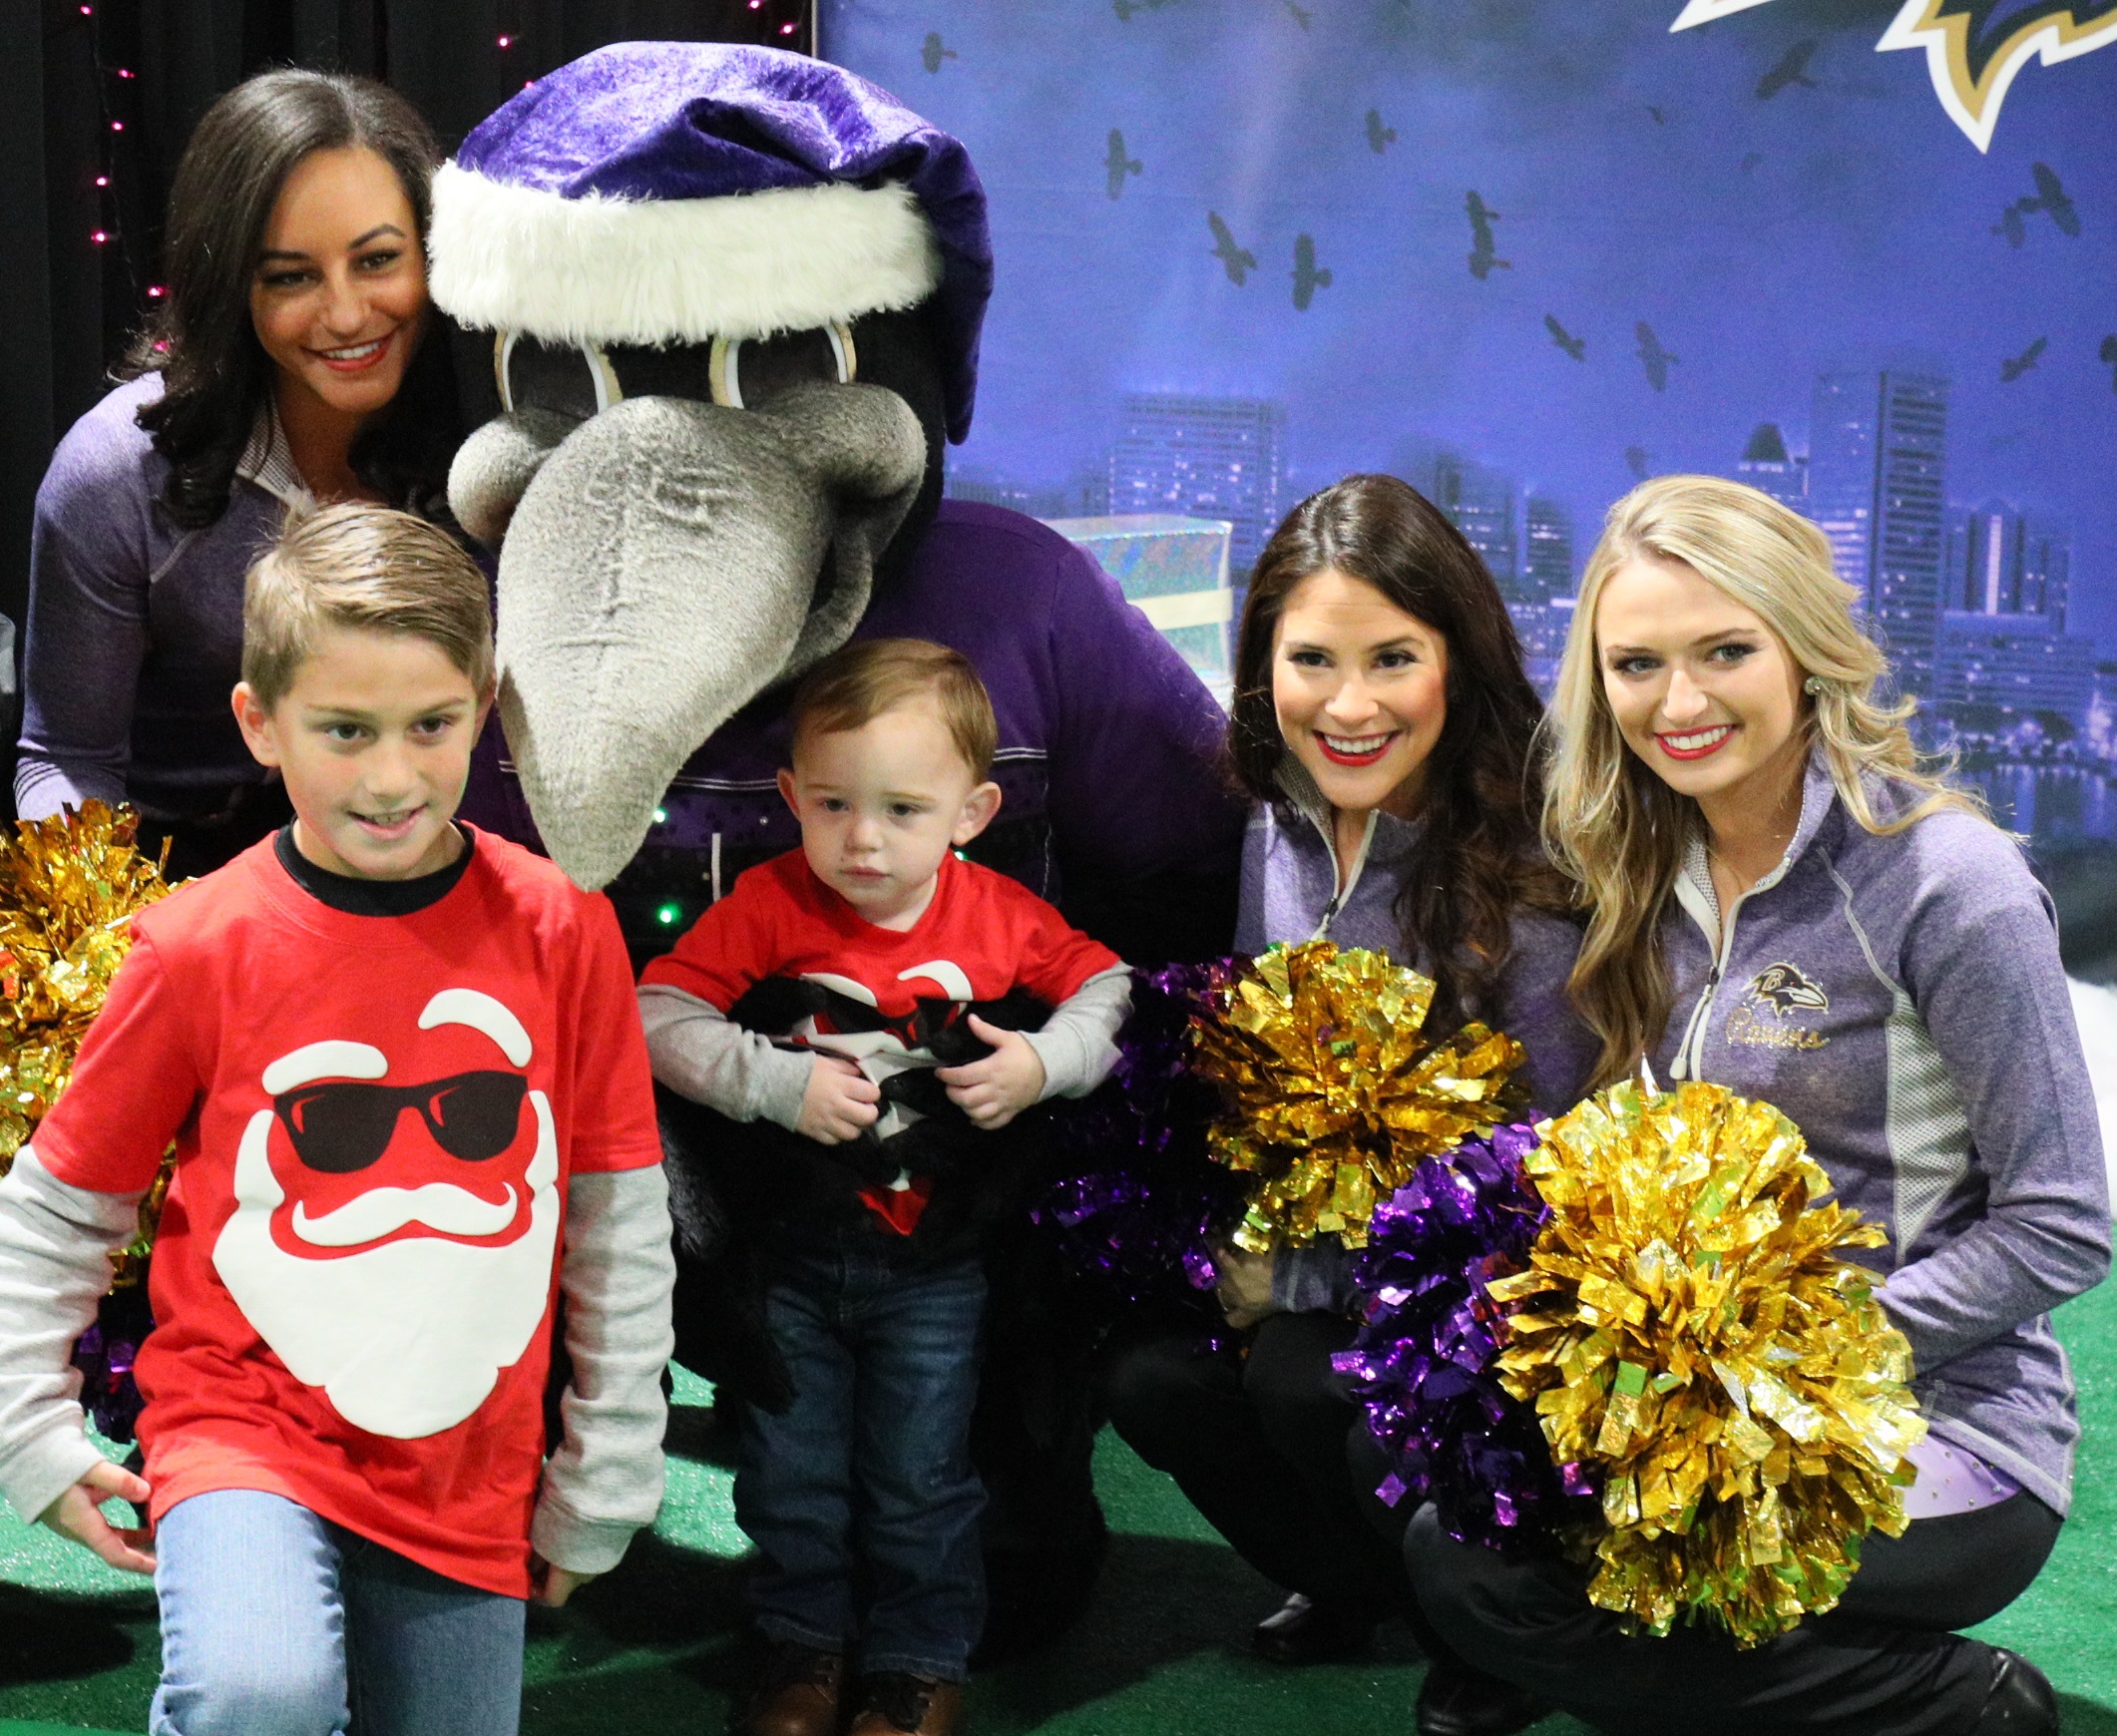 Ravens photo with Poe and cheerleaders